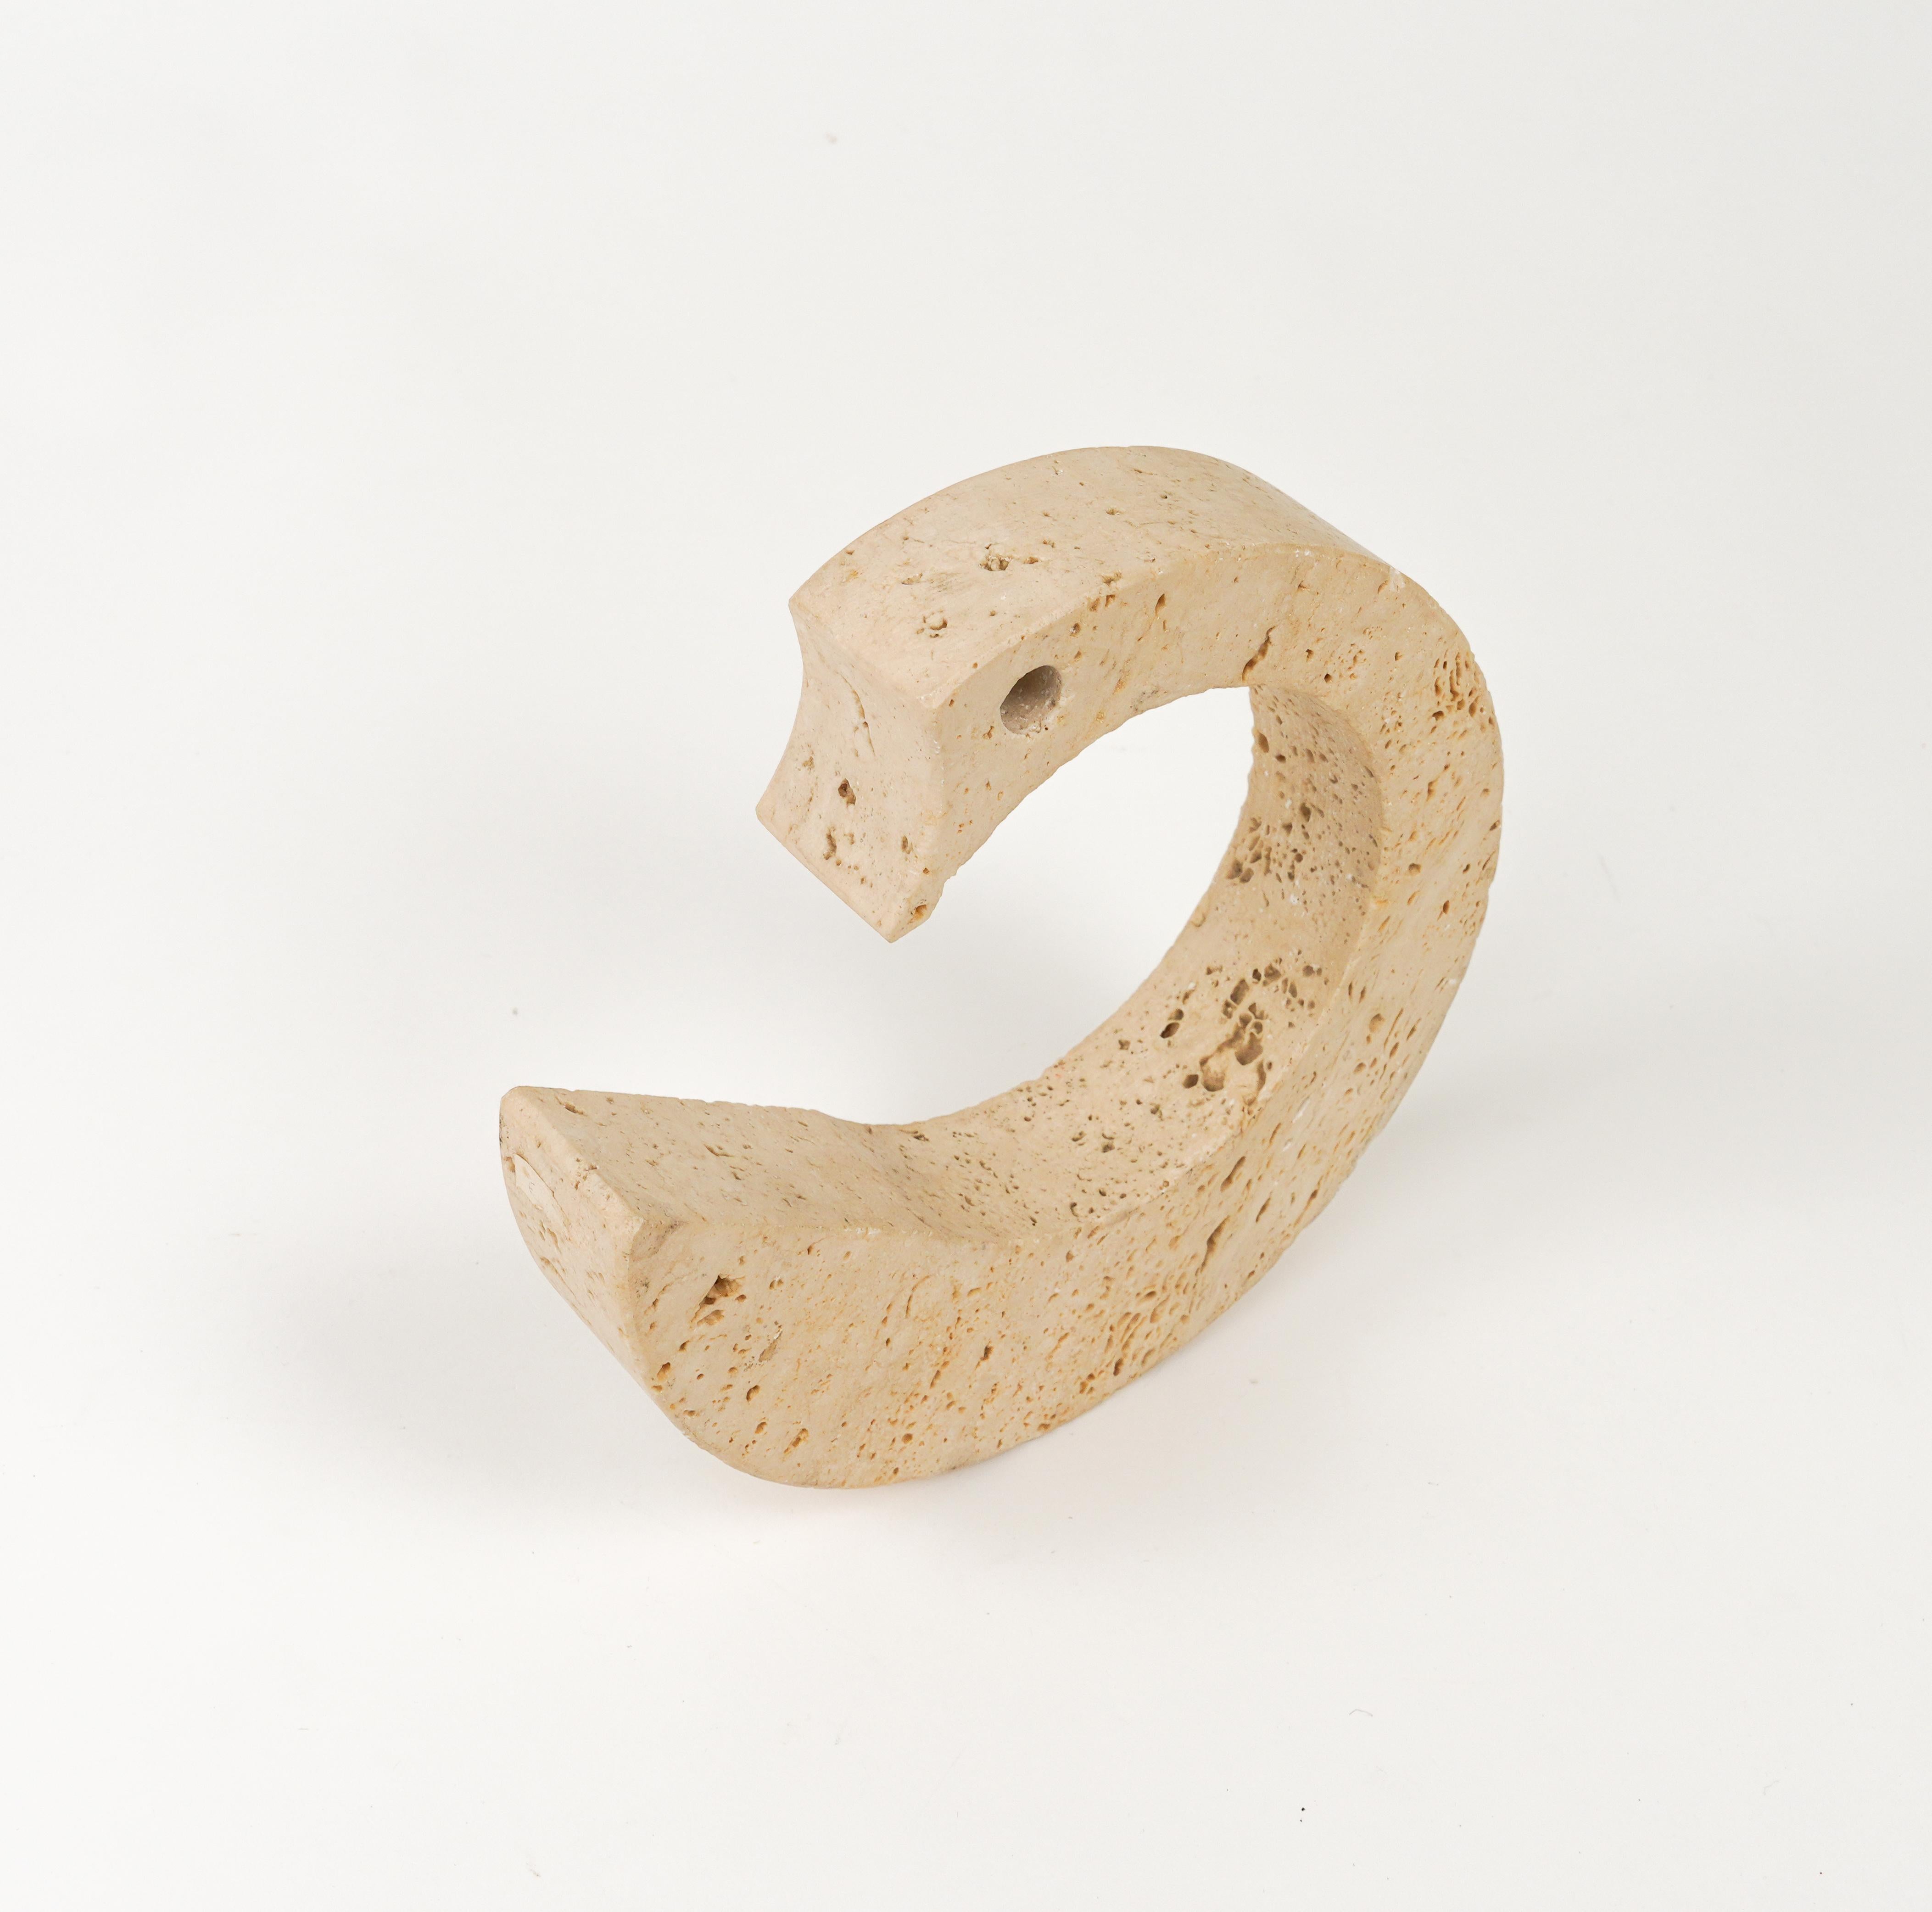 Midcentury Sculpture Swan Figure in Travertine by Fratelli Mannelli, Italy 1970s For Sale 2